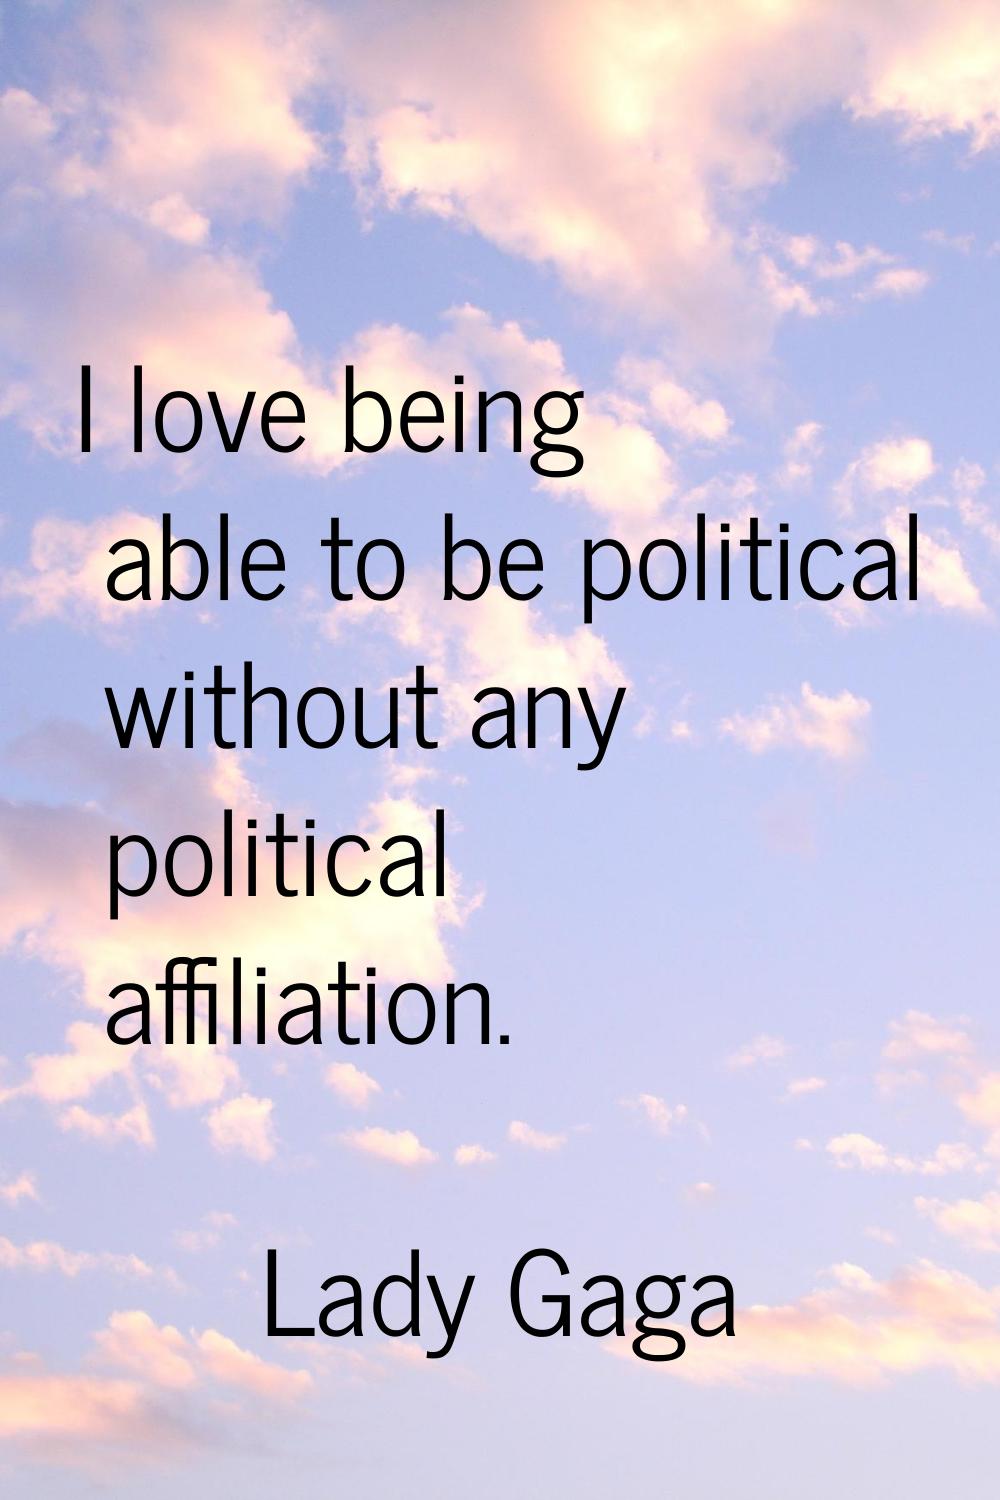 I love being able to be political without any political affiliation.